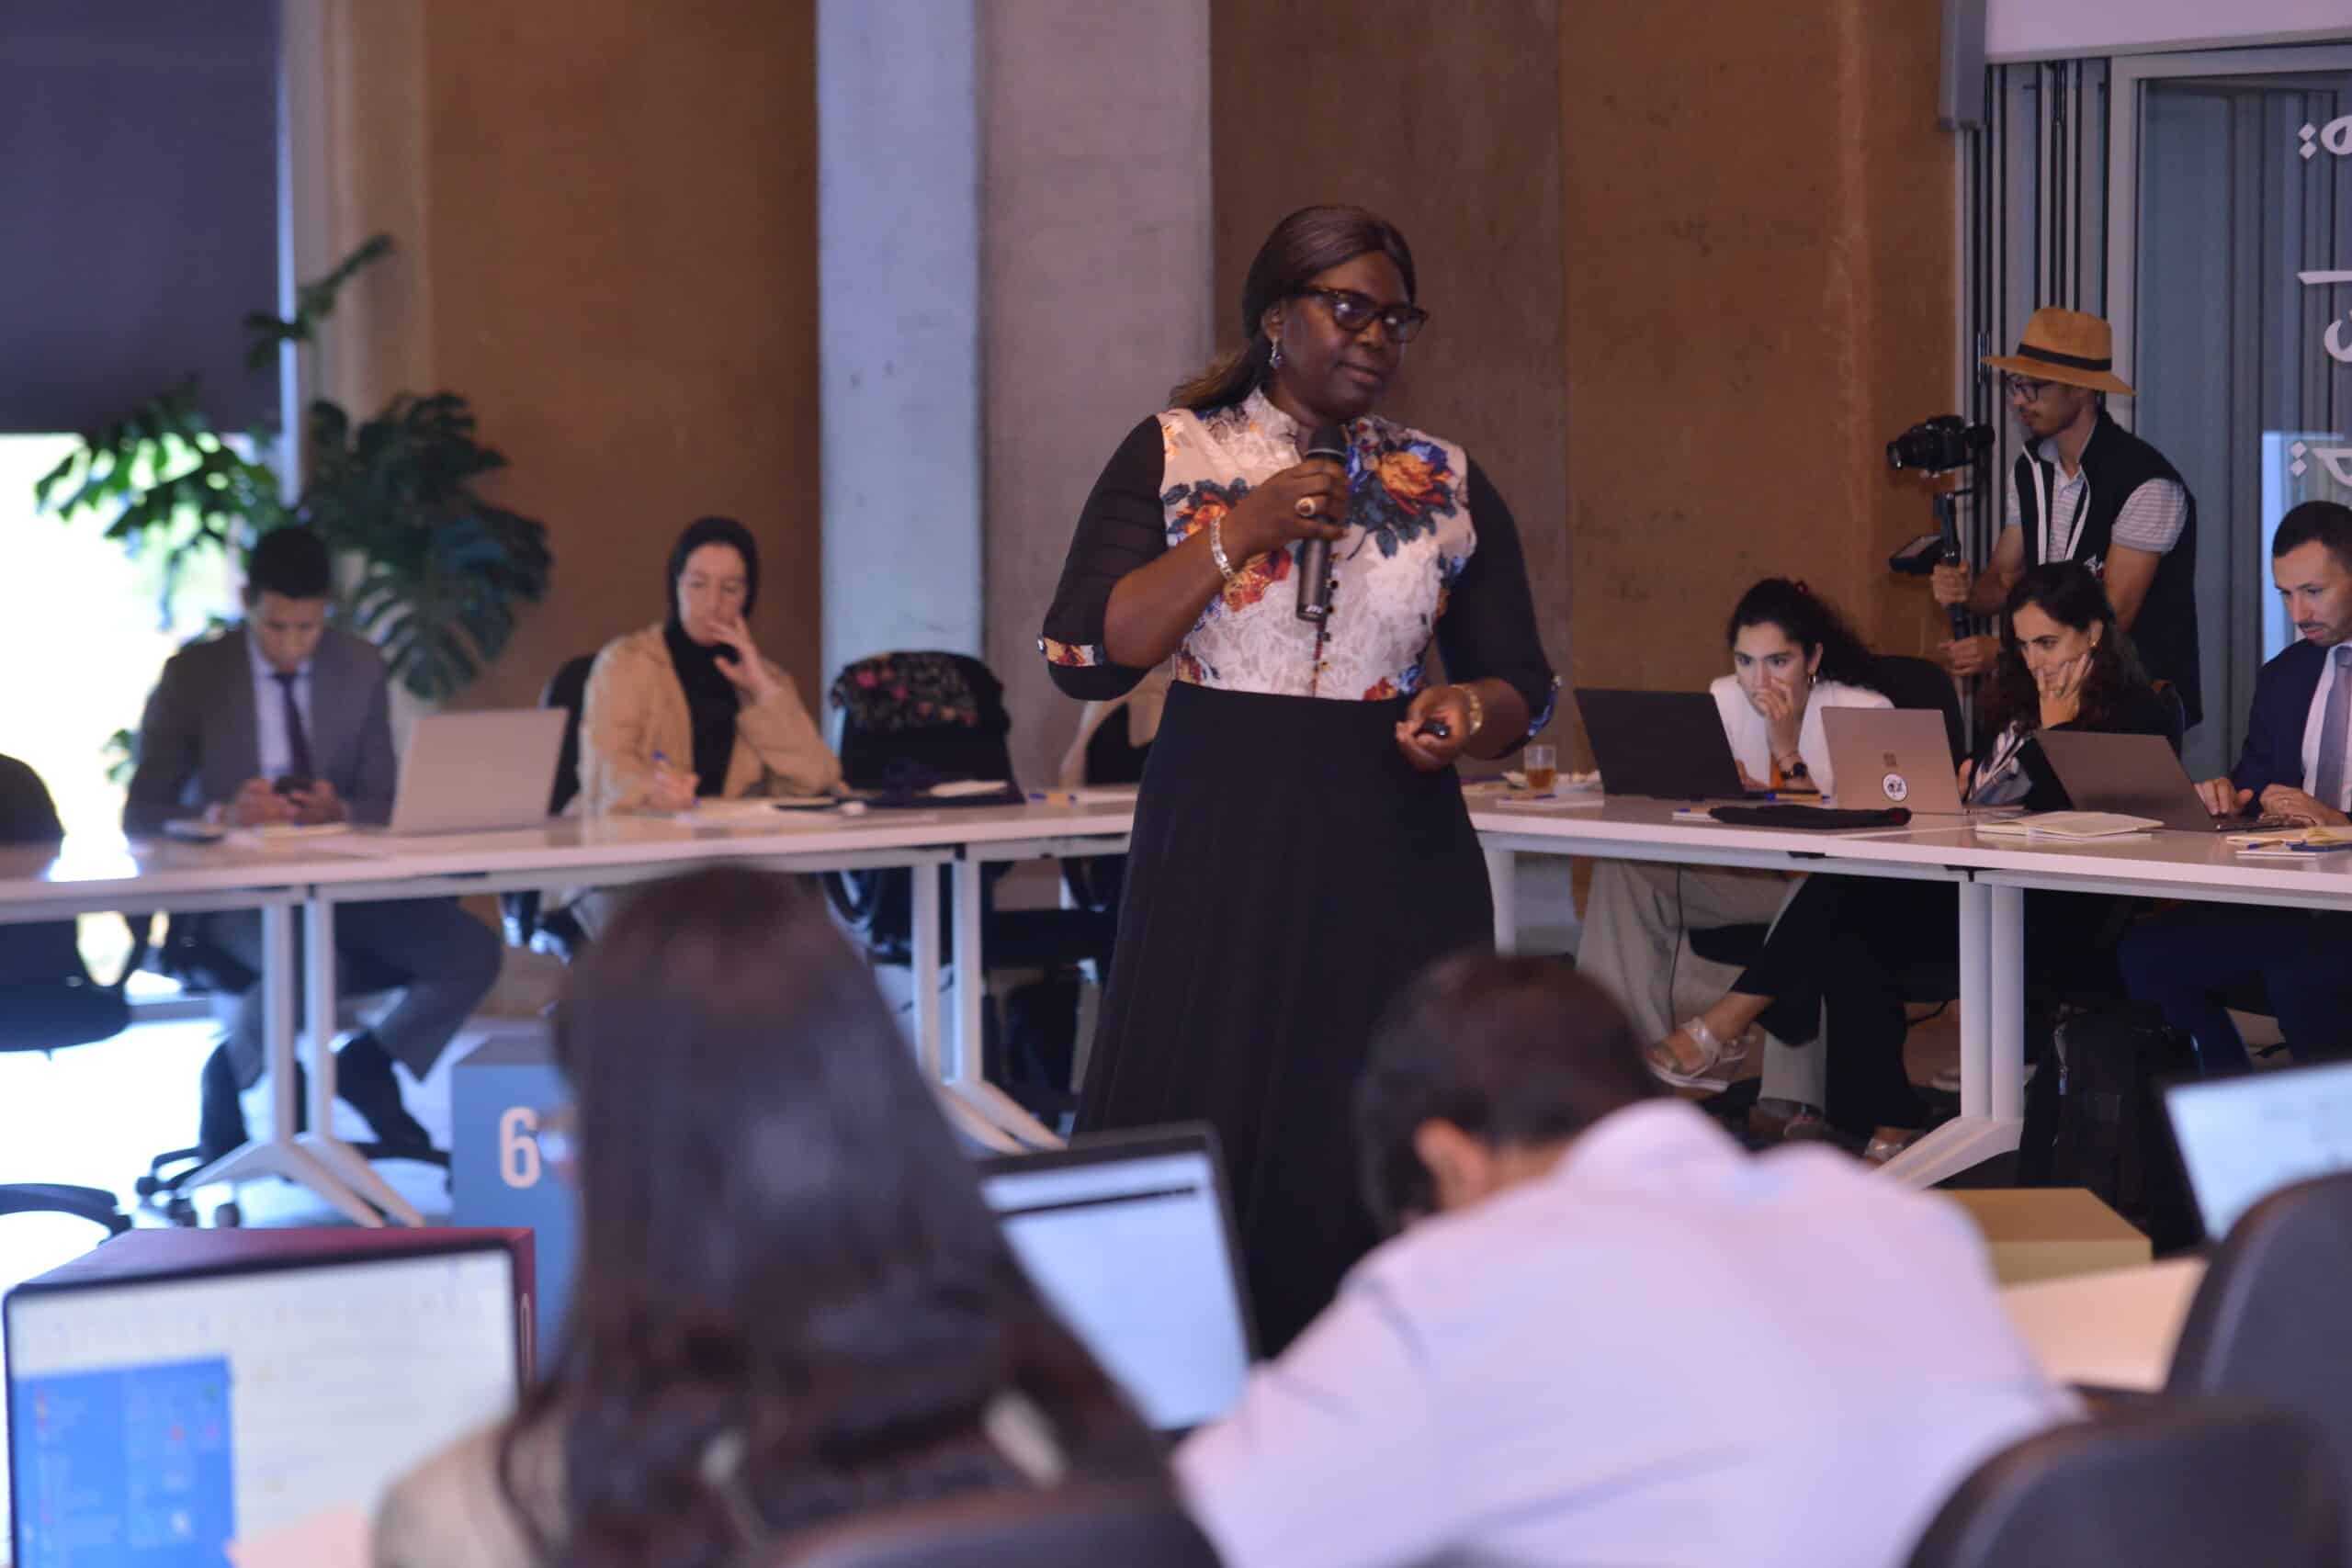 ILO staff member Seynabou Diouf is standing in front of a group of people and leading a workshop in Morocco.